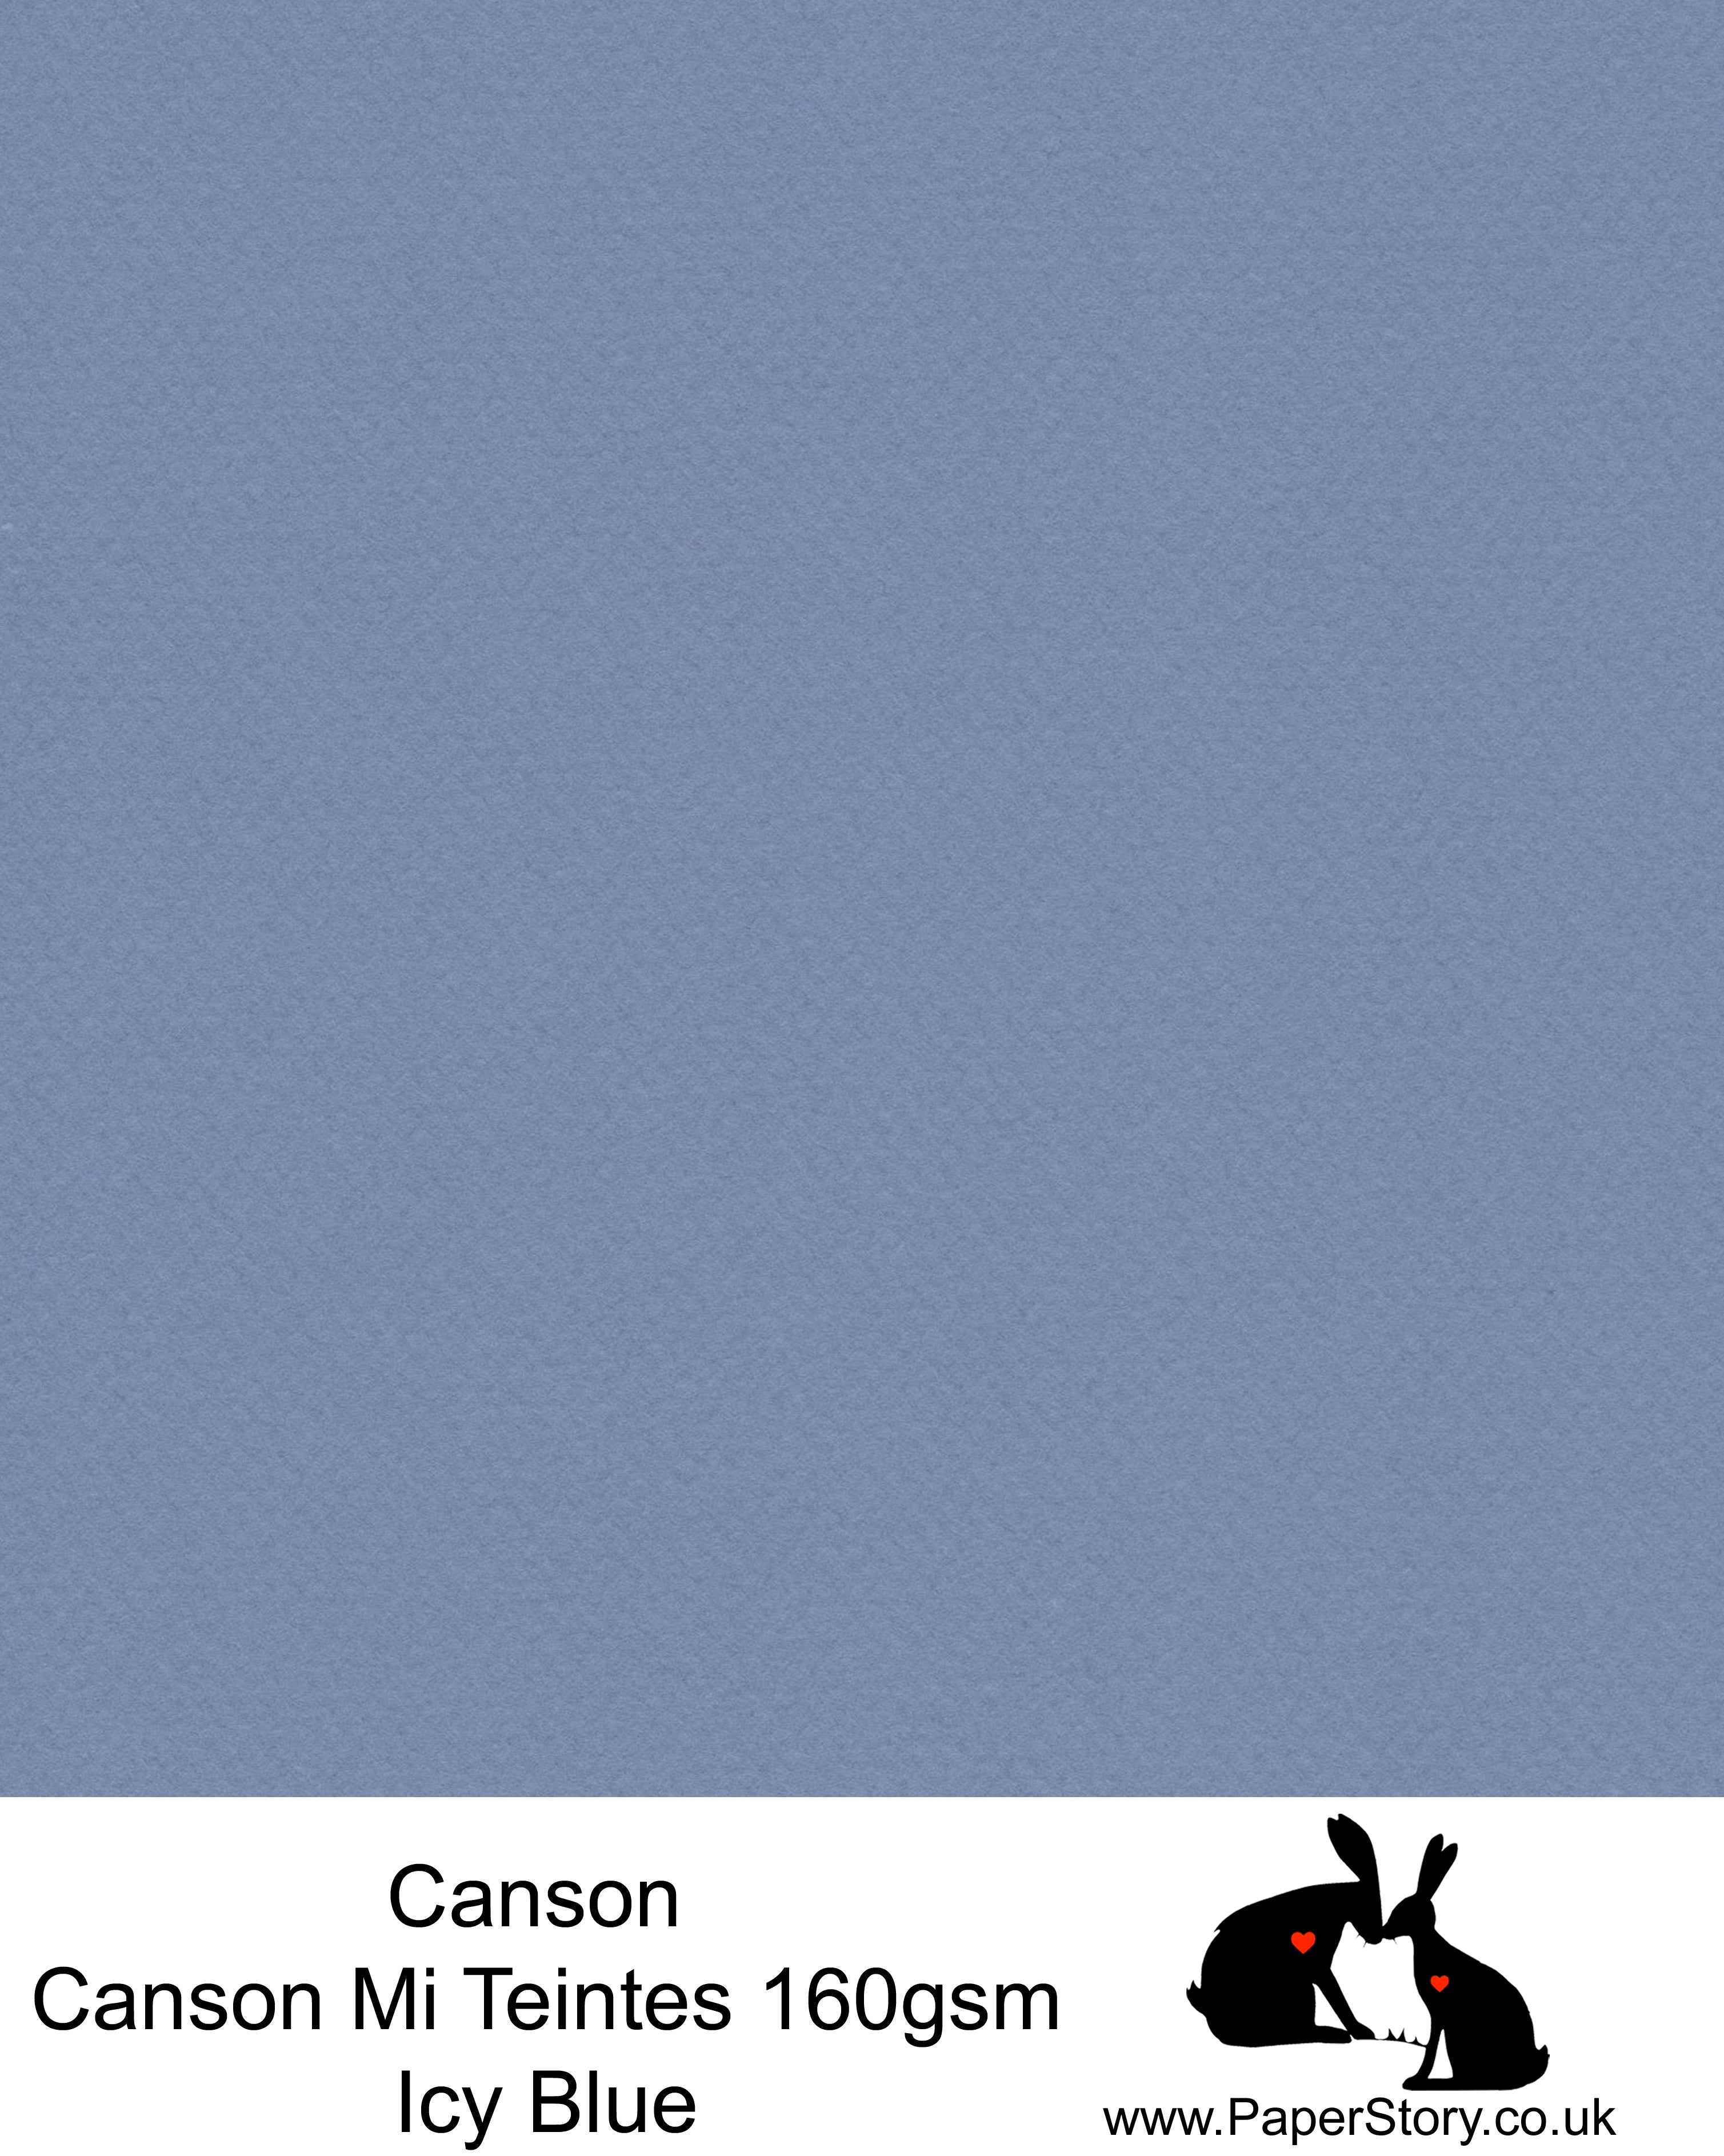 Canson Mi Teintes acid free, Icy Blue, hammered texture honeycomb surface paper 160 gsm. This is a popular and classic paper for all artists especially well respected for Pastel  and Papercutting made famous by Paper Panda. This paper has a honeycombed finish one side and fine grain the other. An authentic art paper, acid free with a  very high 50% cotton content. Canson Mi-Teintes complies with the ISO 9706 standard on permanence, a guarantee of excellent conservation  